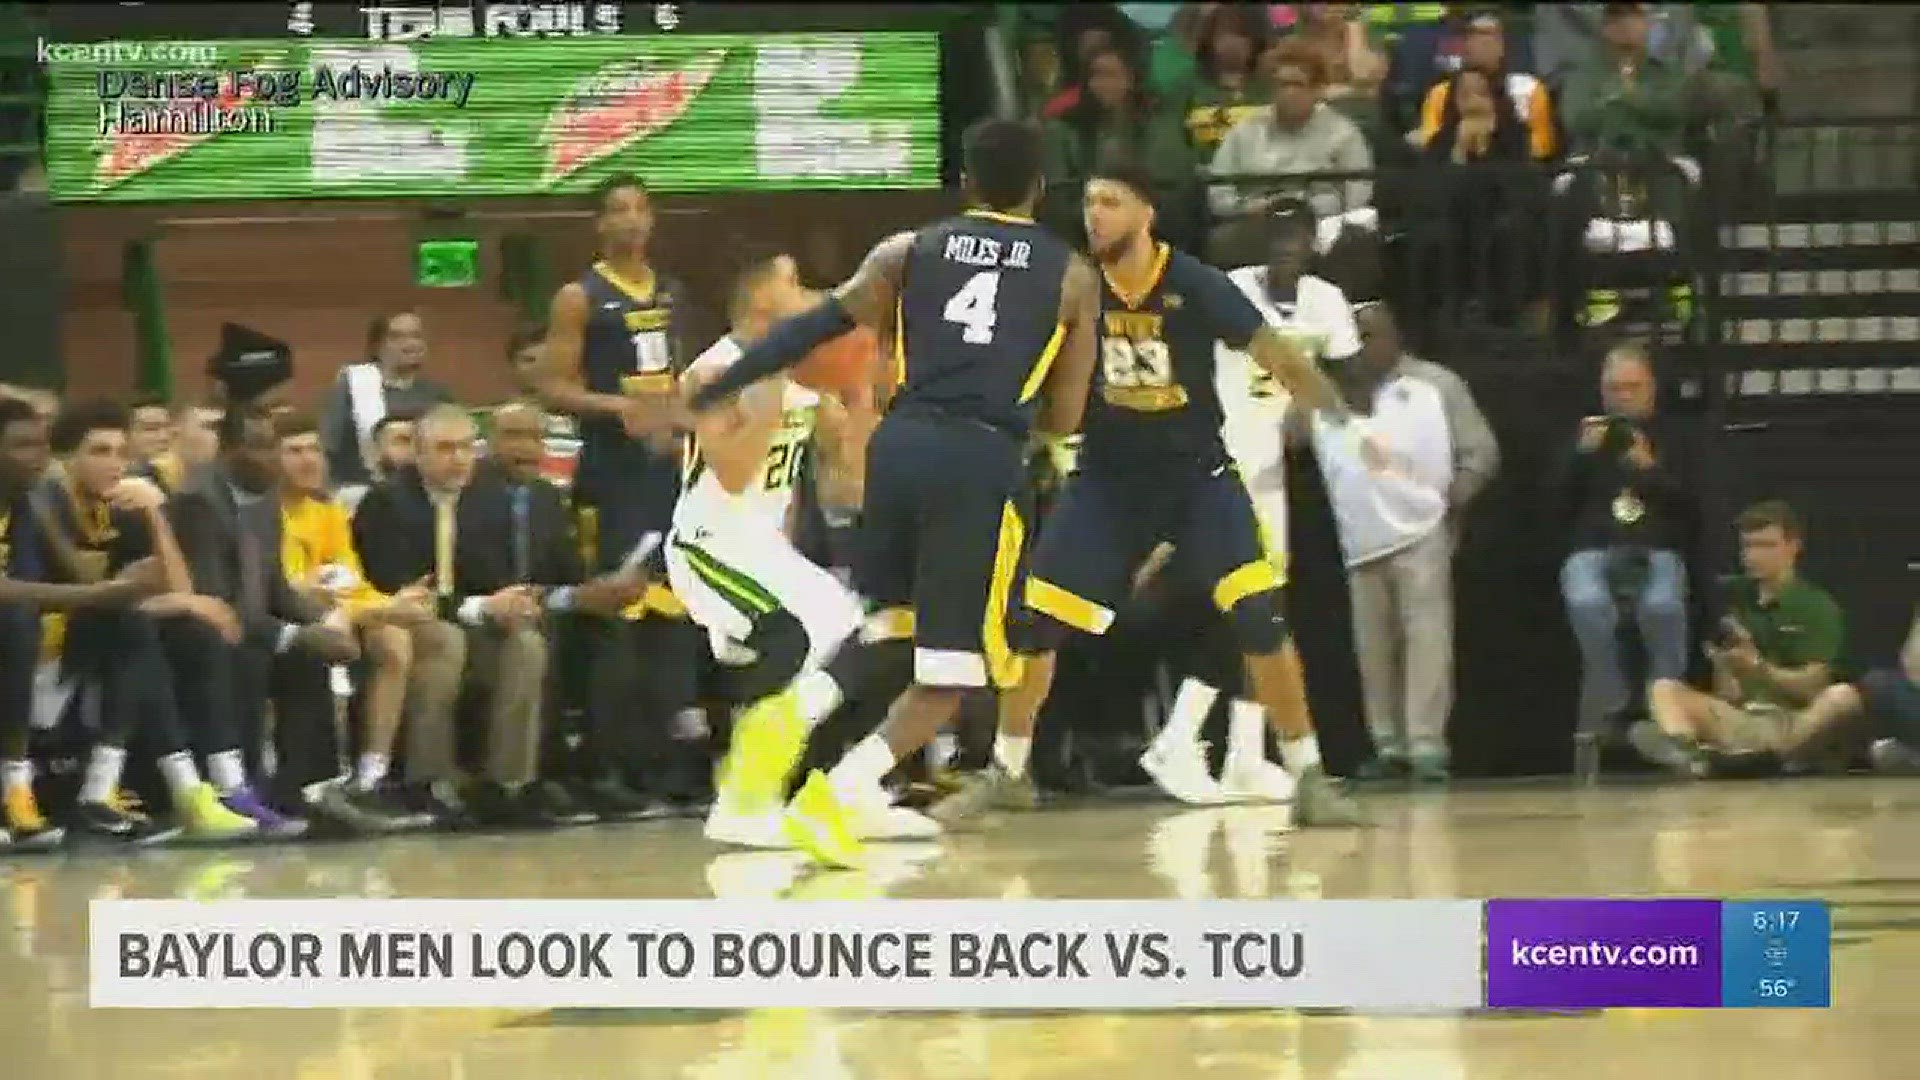 Baylor Men's Basketball looks to bounce back against TCU in Fort Worth.